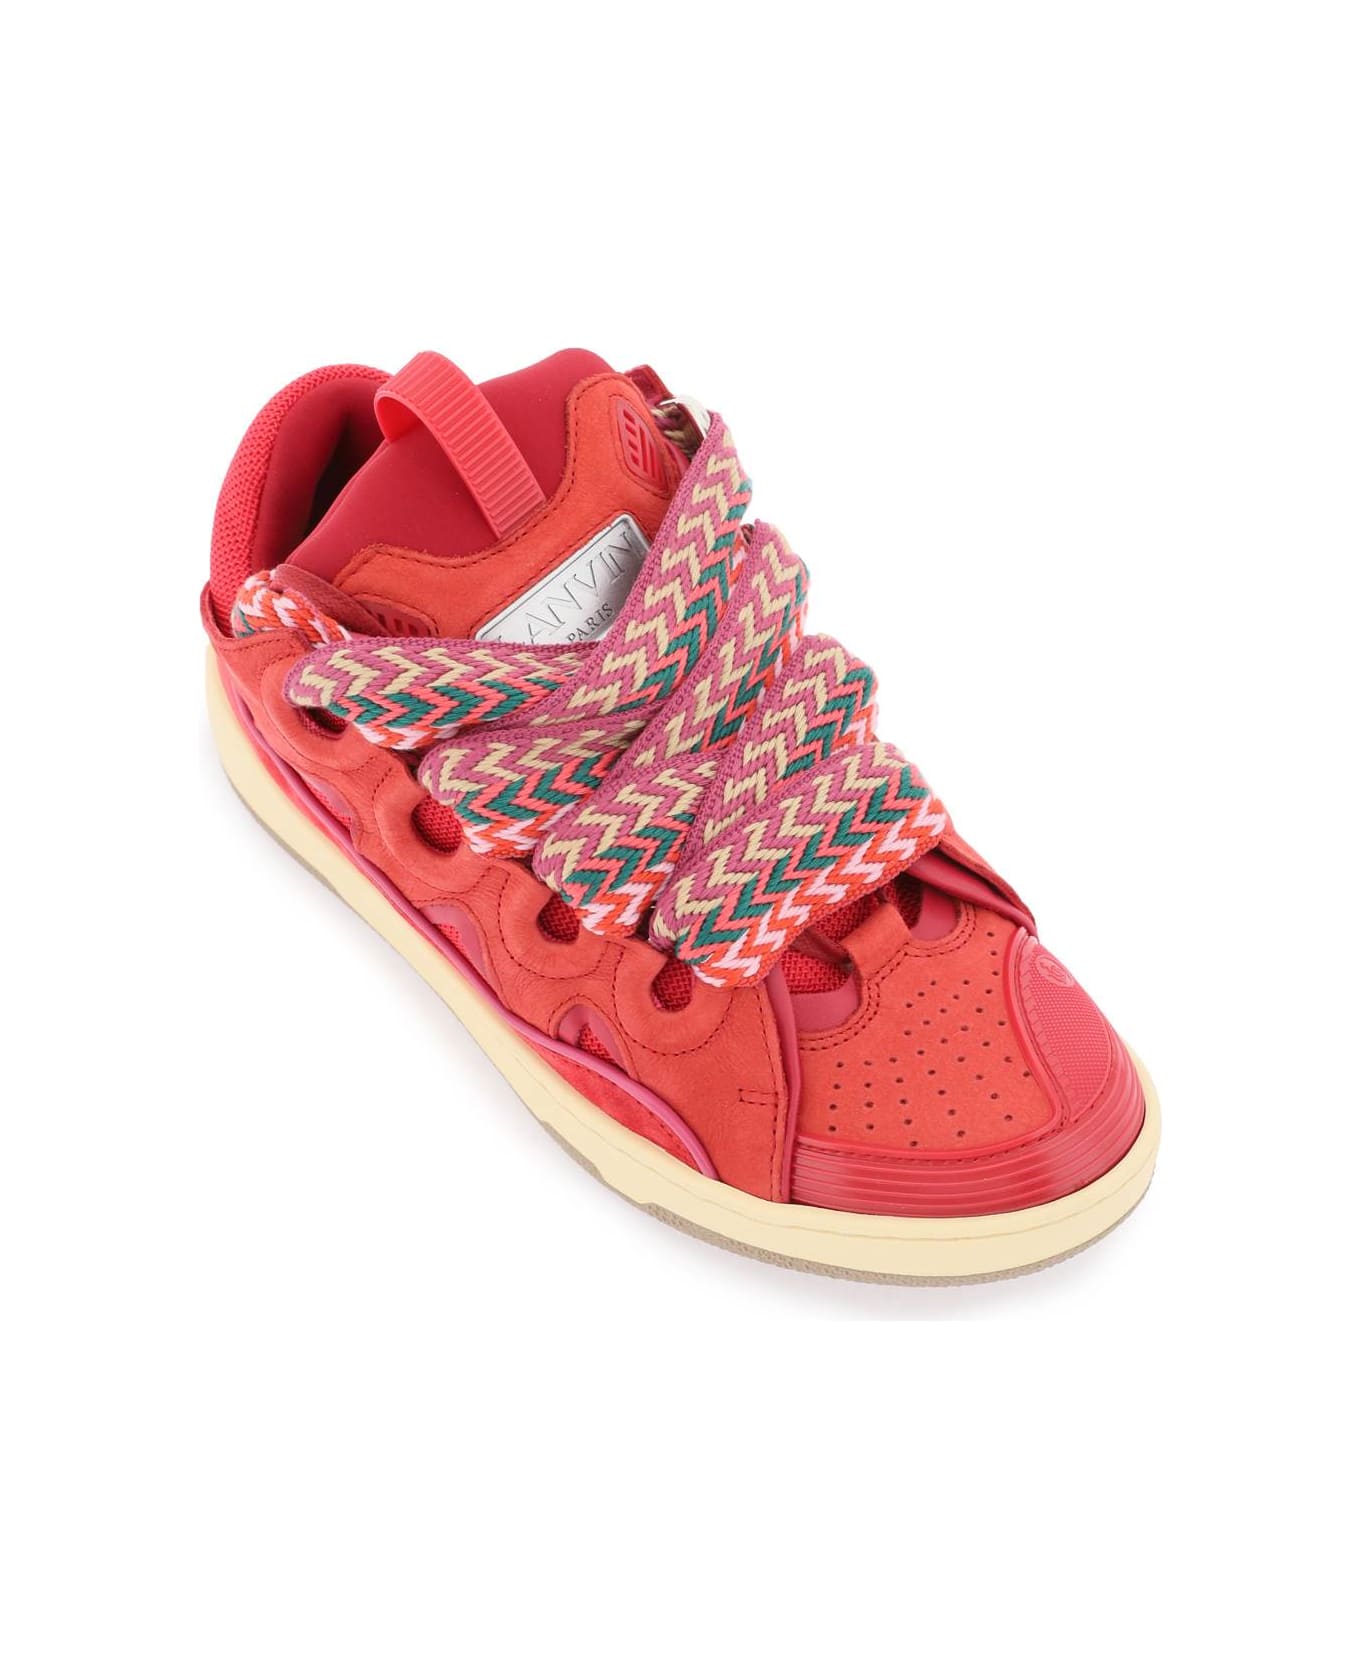 Lanvin Curb Sneakers In Fuxia Suede And Leather - Fuchsia